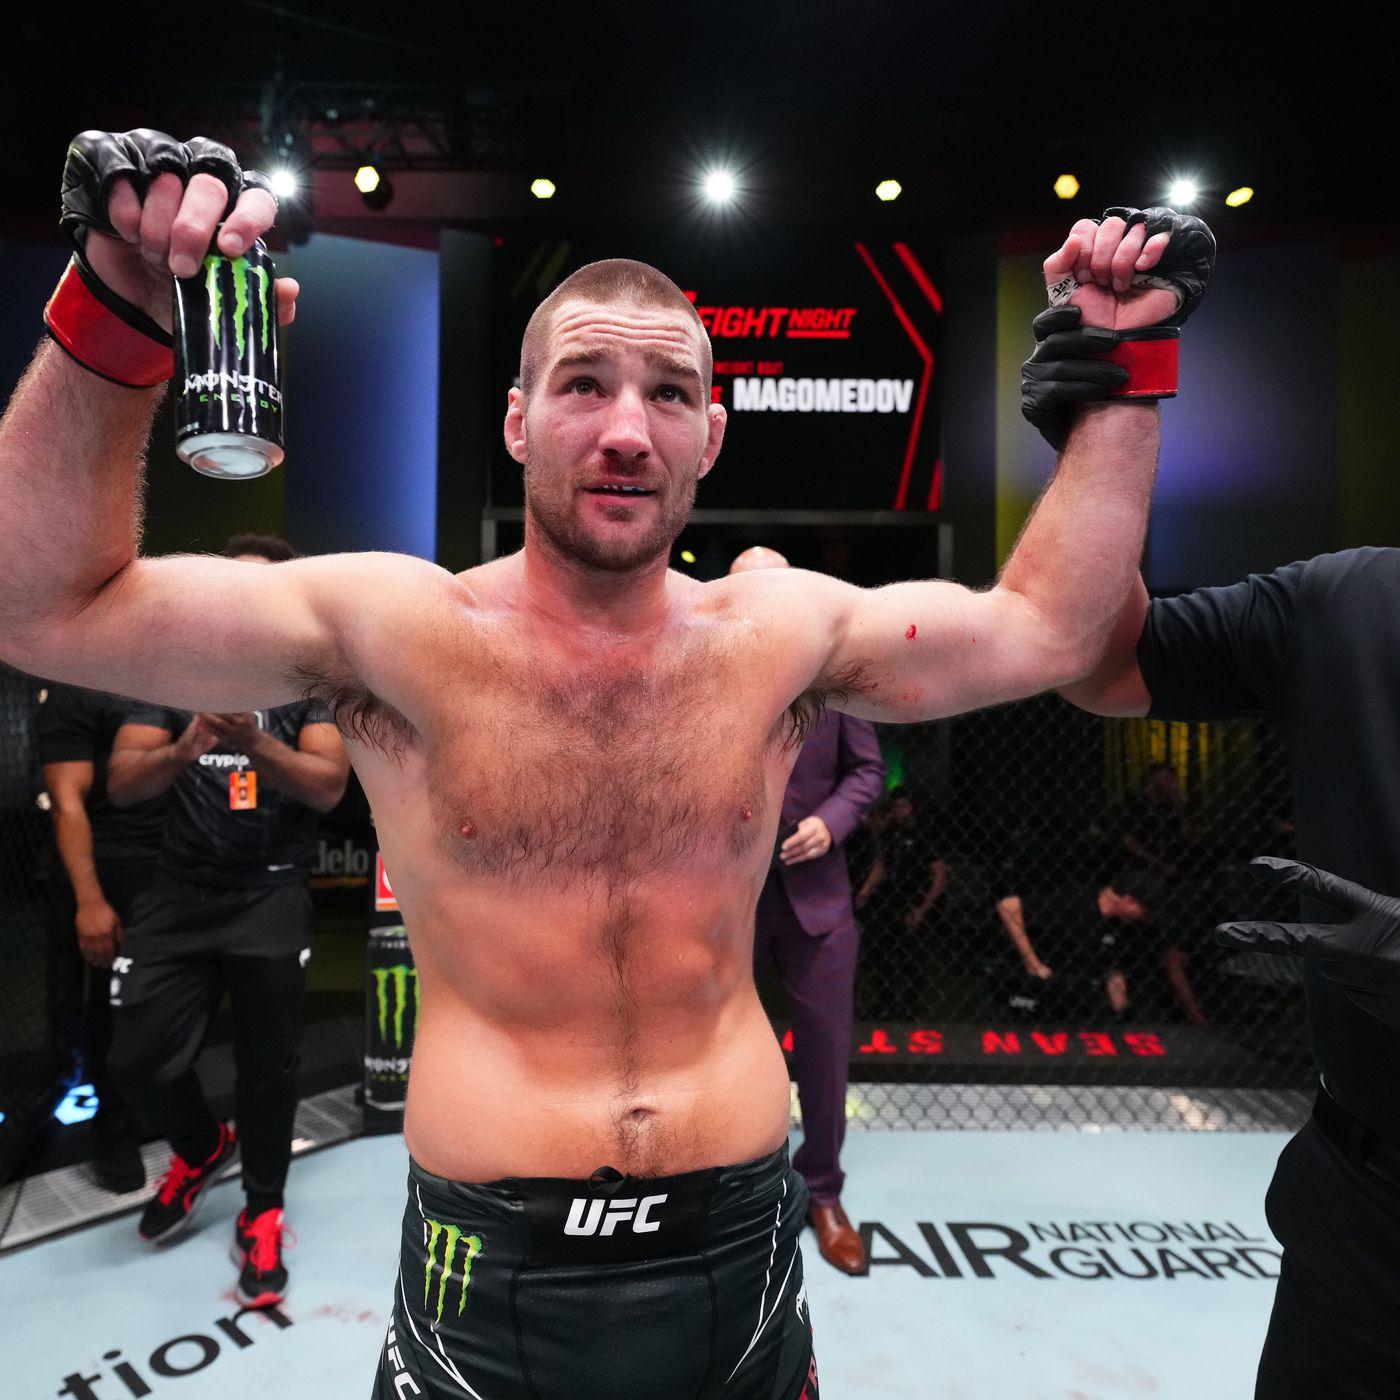 Sean Strickland raises his hands after defeating Abus Magomedov. Chris Unger - Zuffa LLC via Getty Images